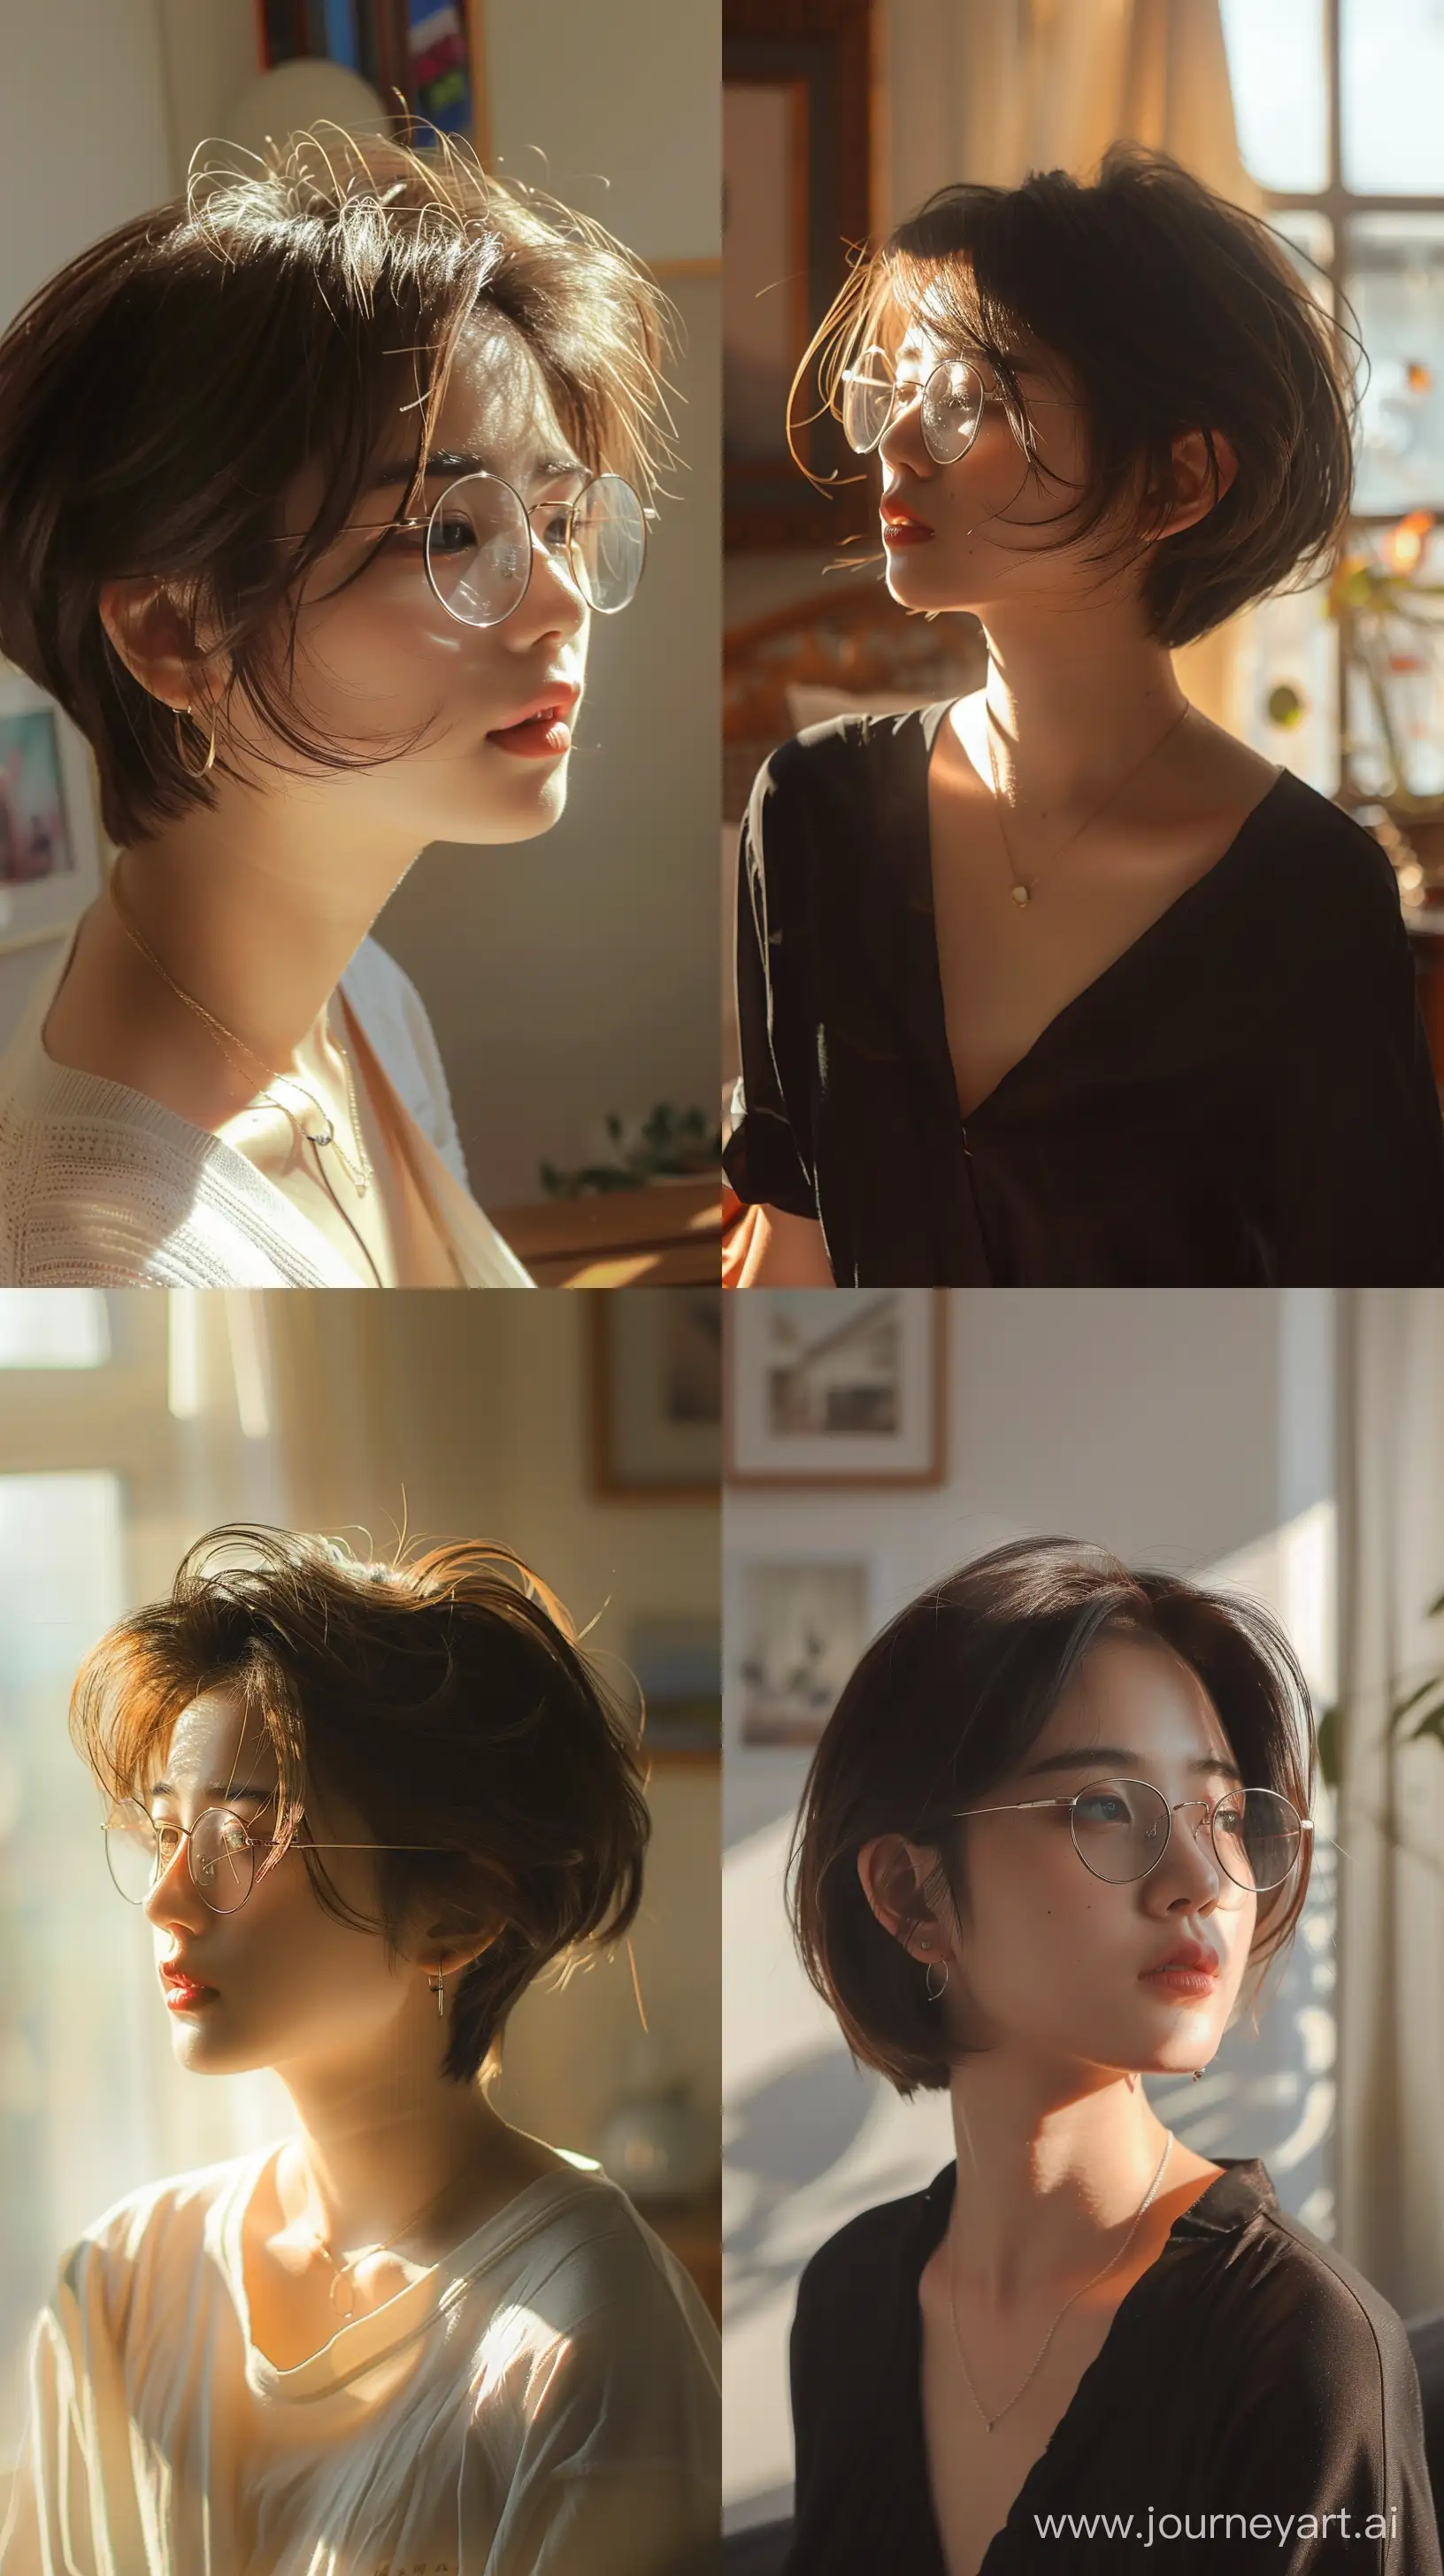 Stylish-Asian-Woman-with-Short-Hair-and-Glasses-in-Sunlit-Room